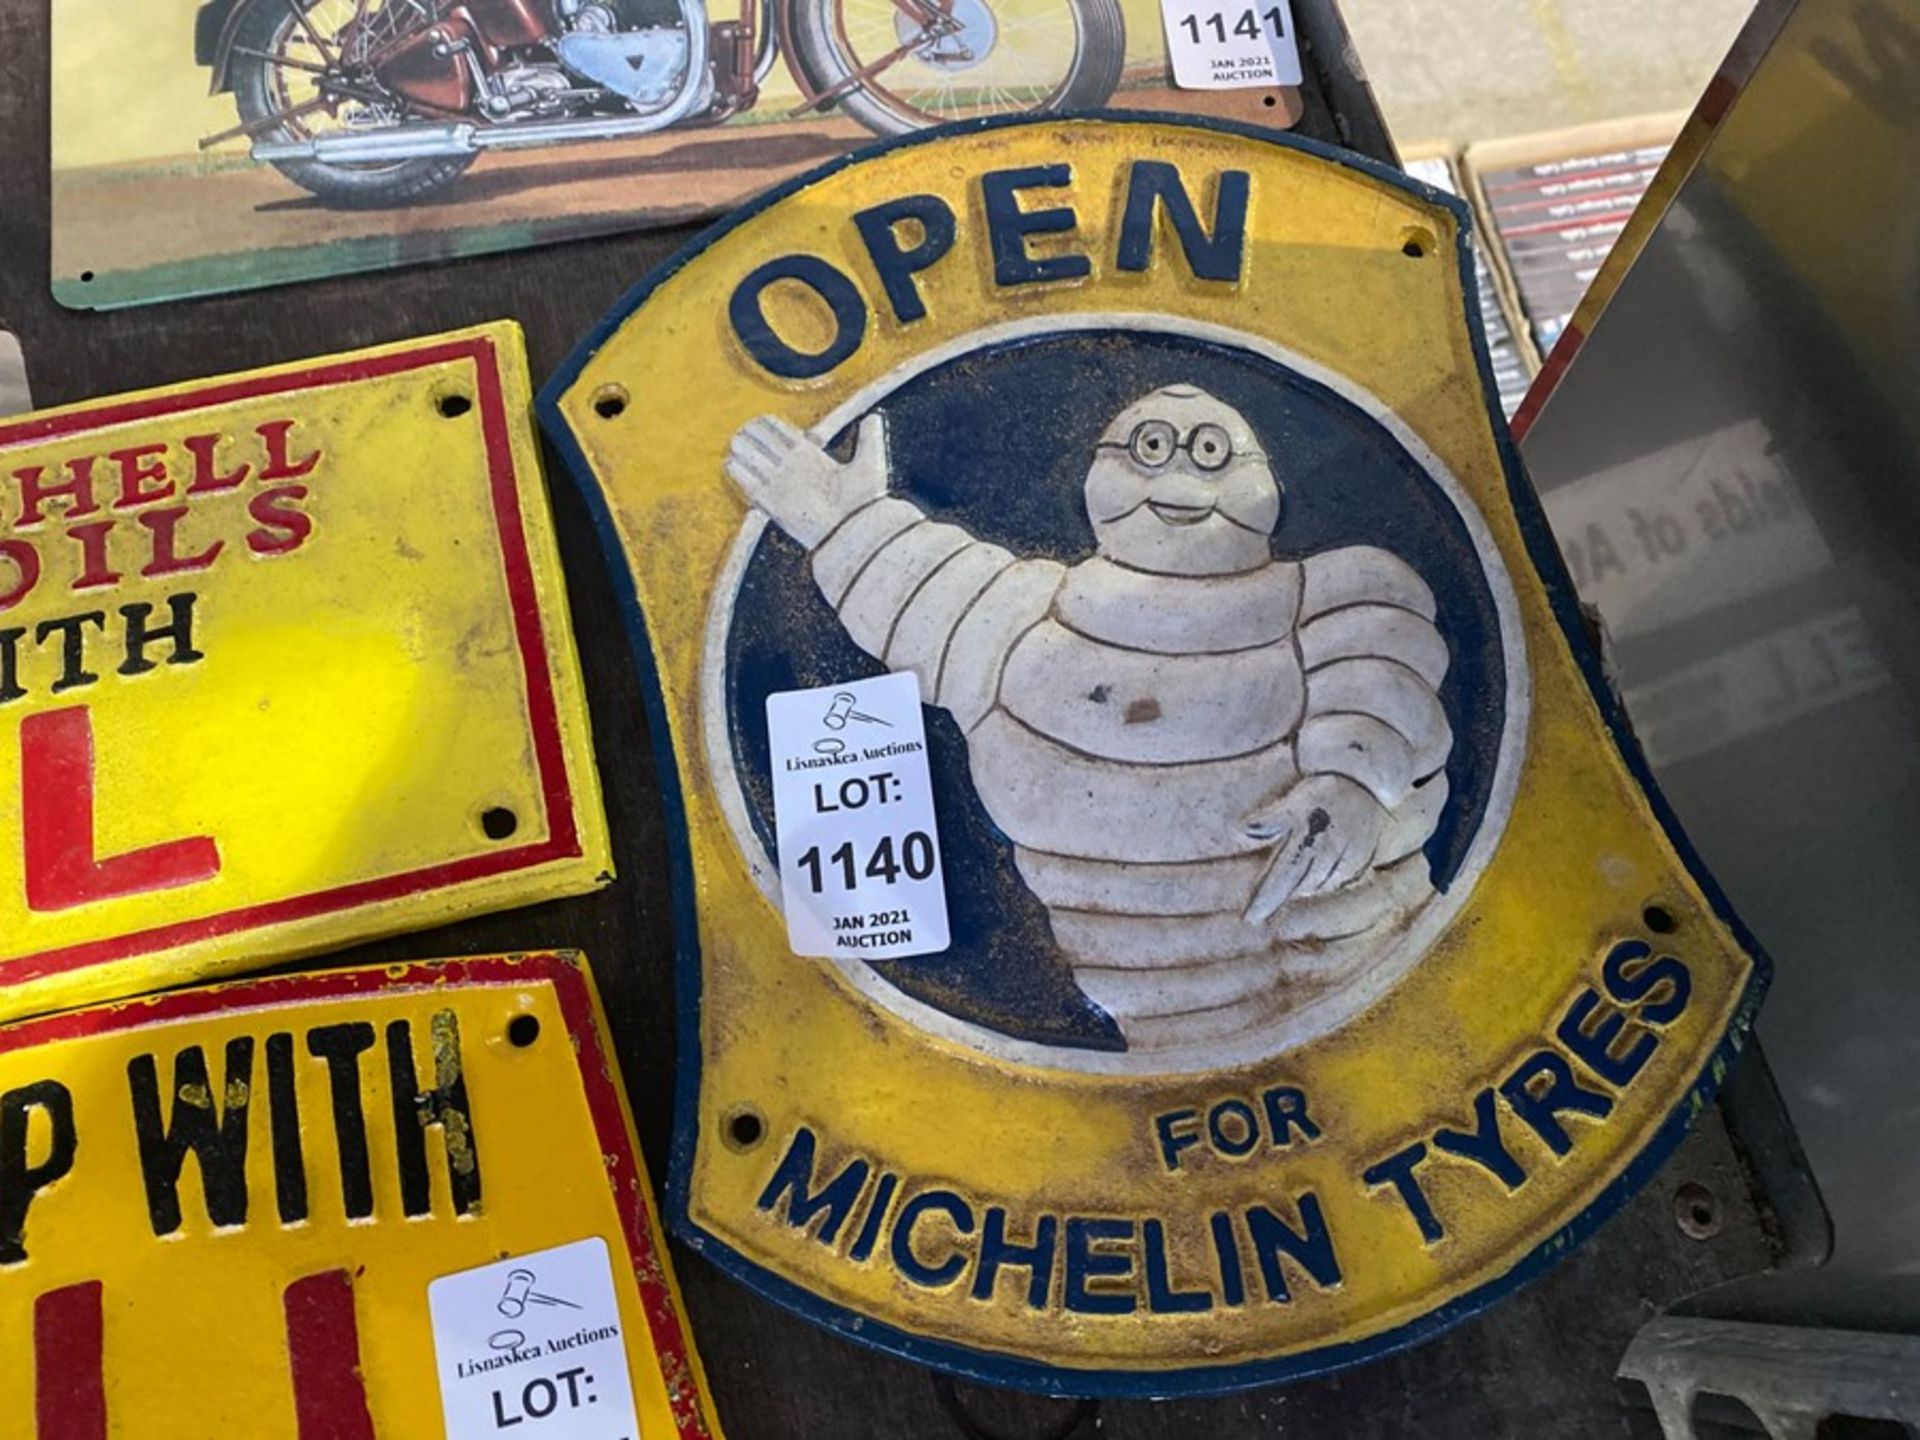 MICHELIN TYRES CAST IRON SIGN